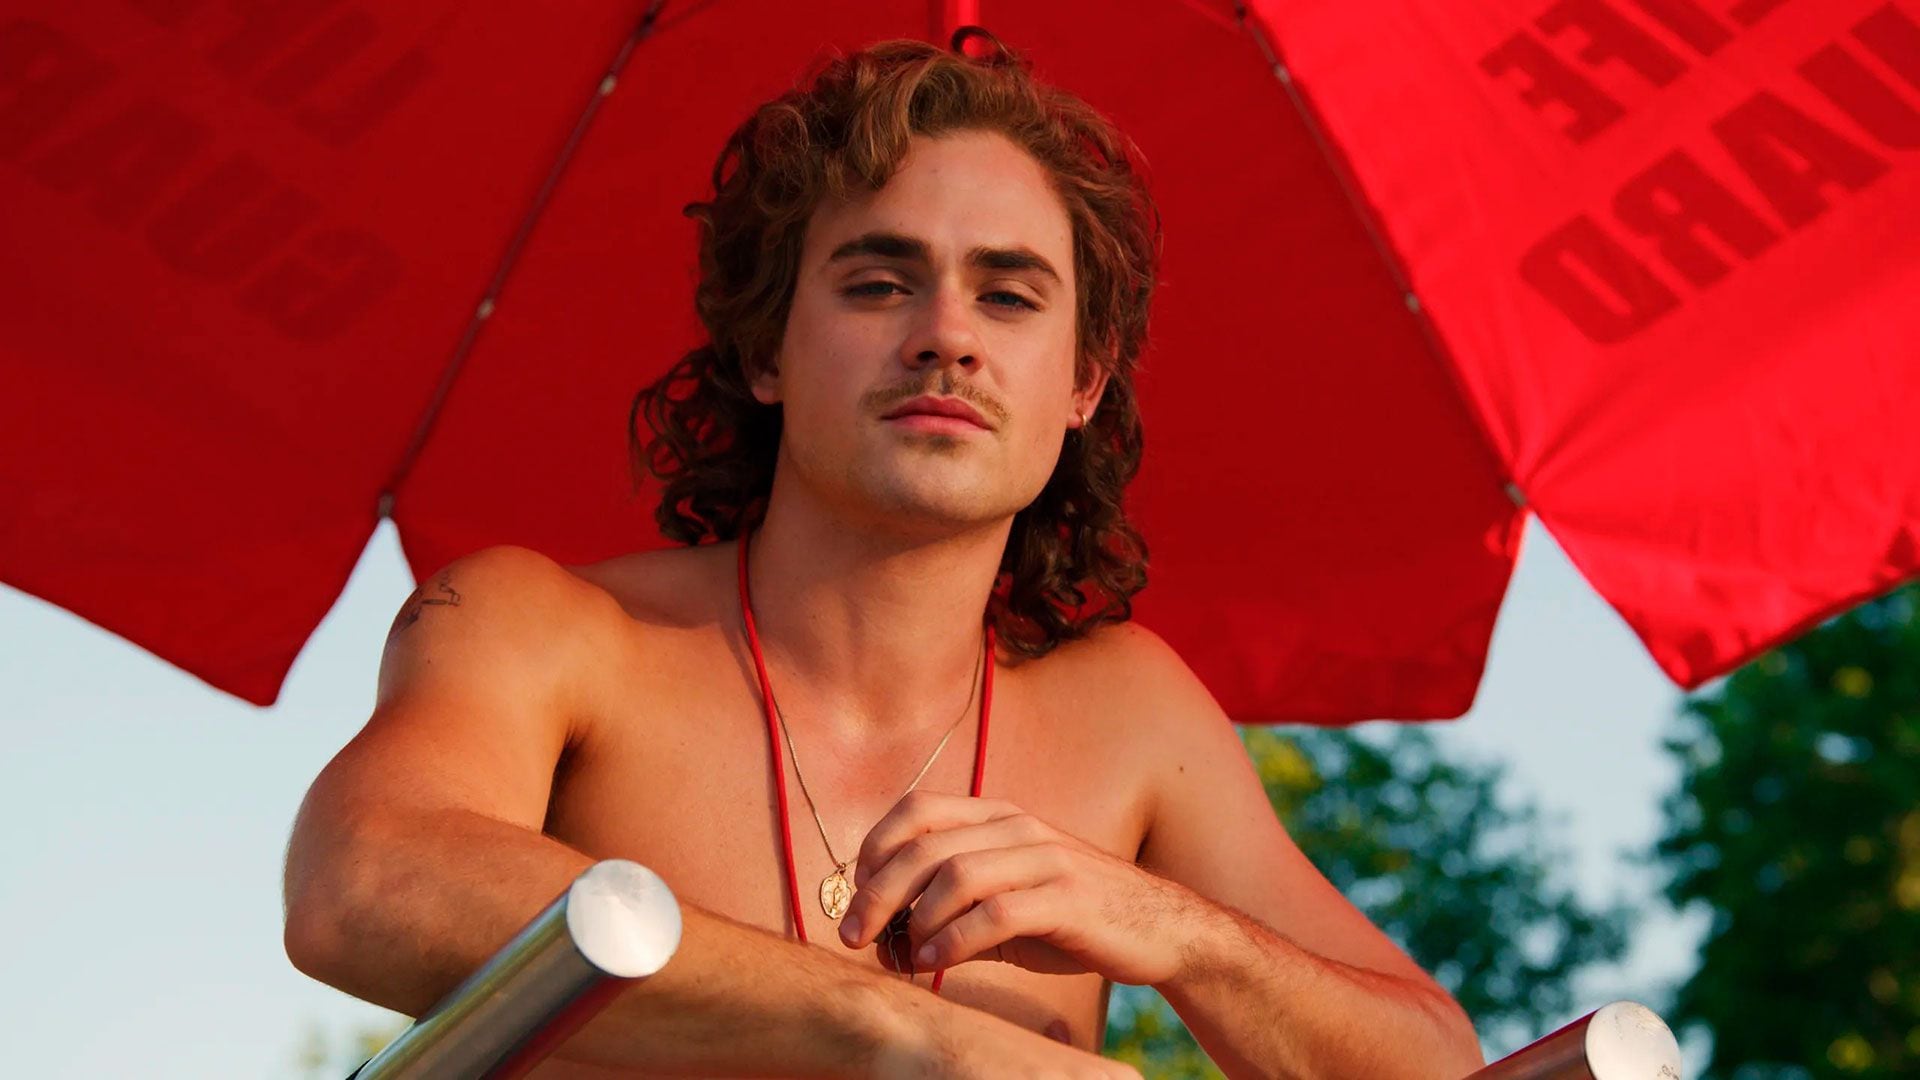 The traumatic childhood of Dacre Montgomery, the heartthrob of Stranger Things